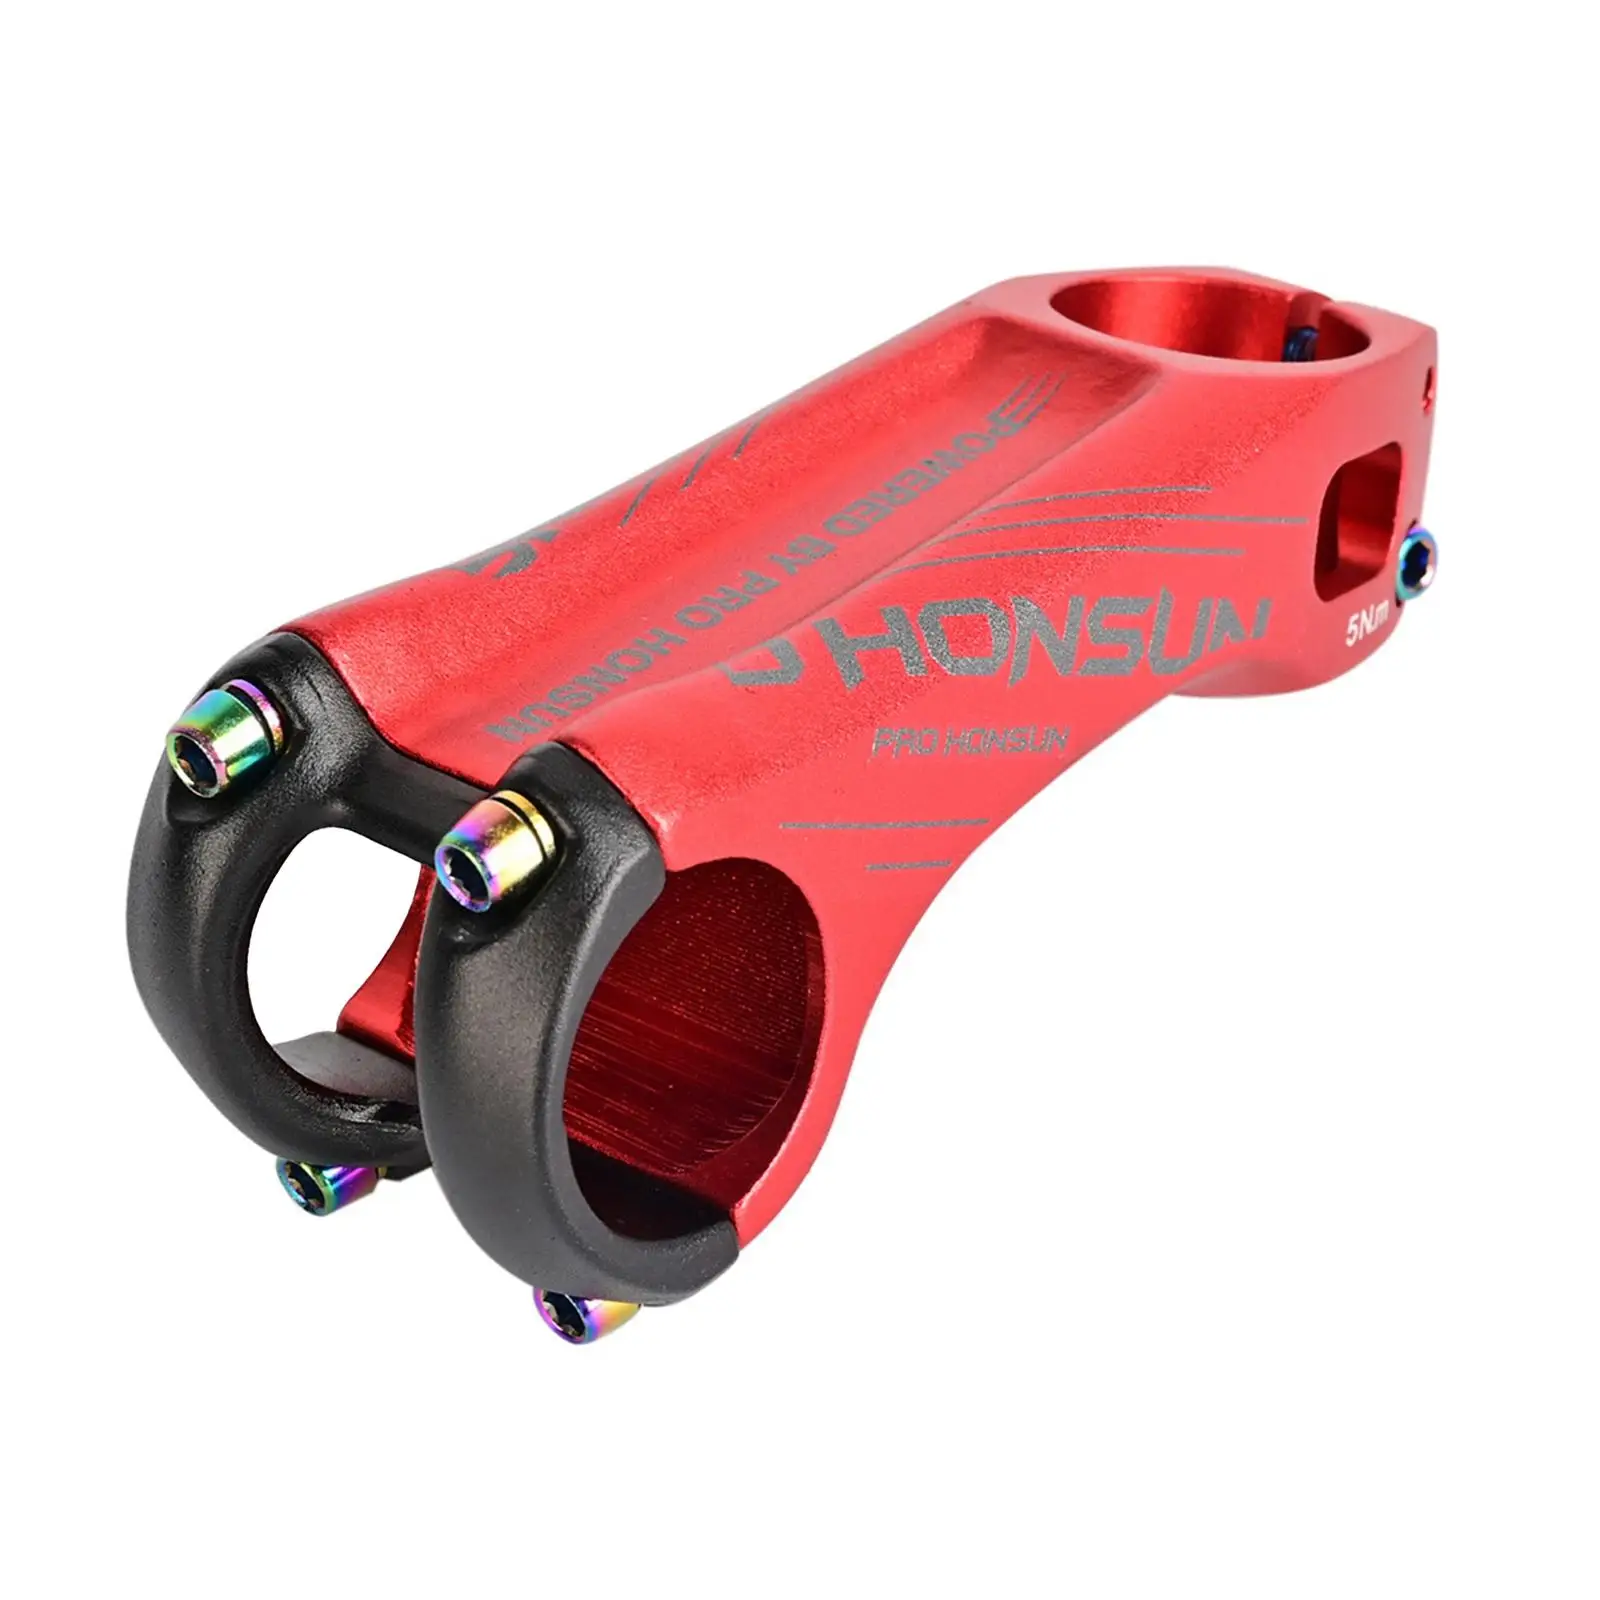 Mountain Bike Stem Bicycle Accessories 17 Extender for BMX MTB Bicycle